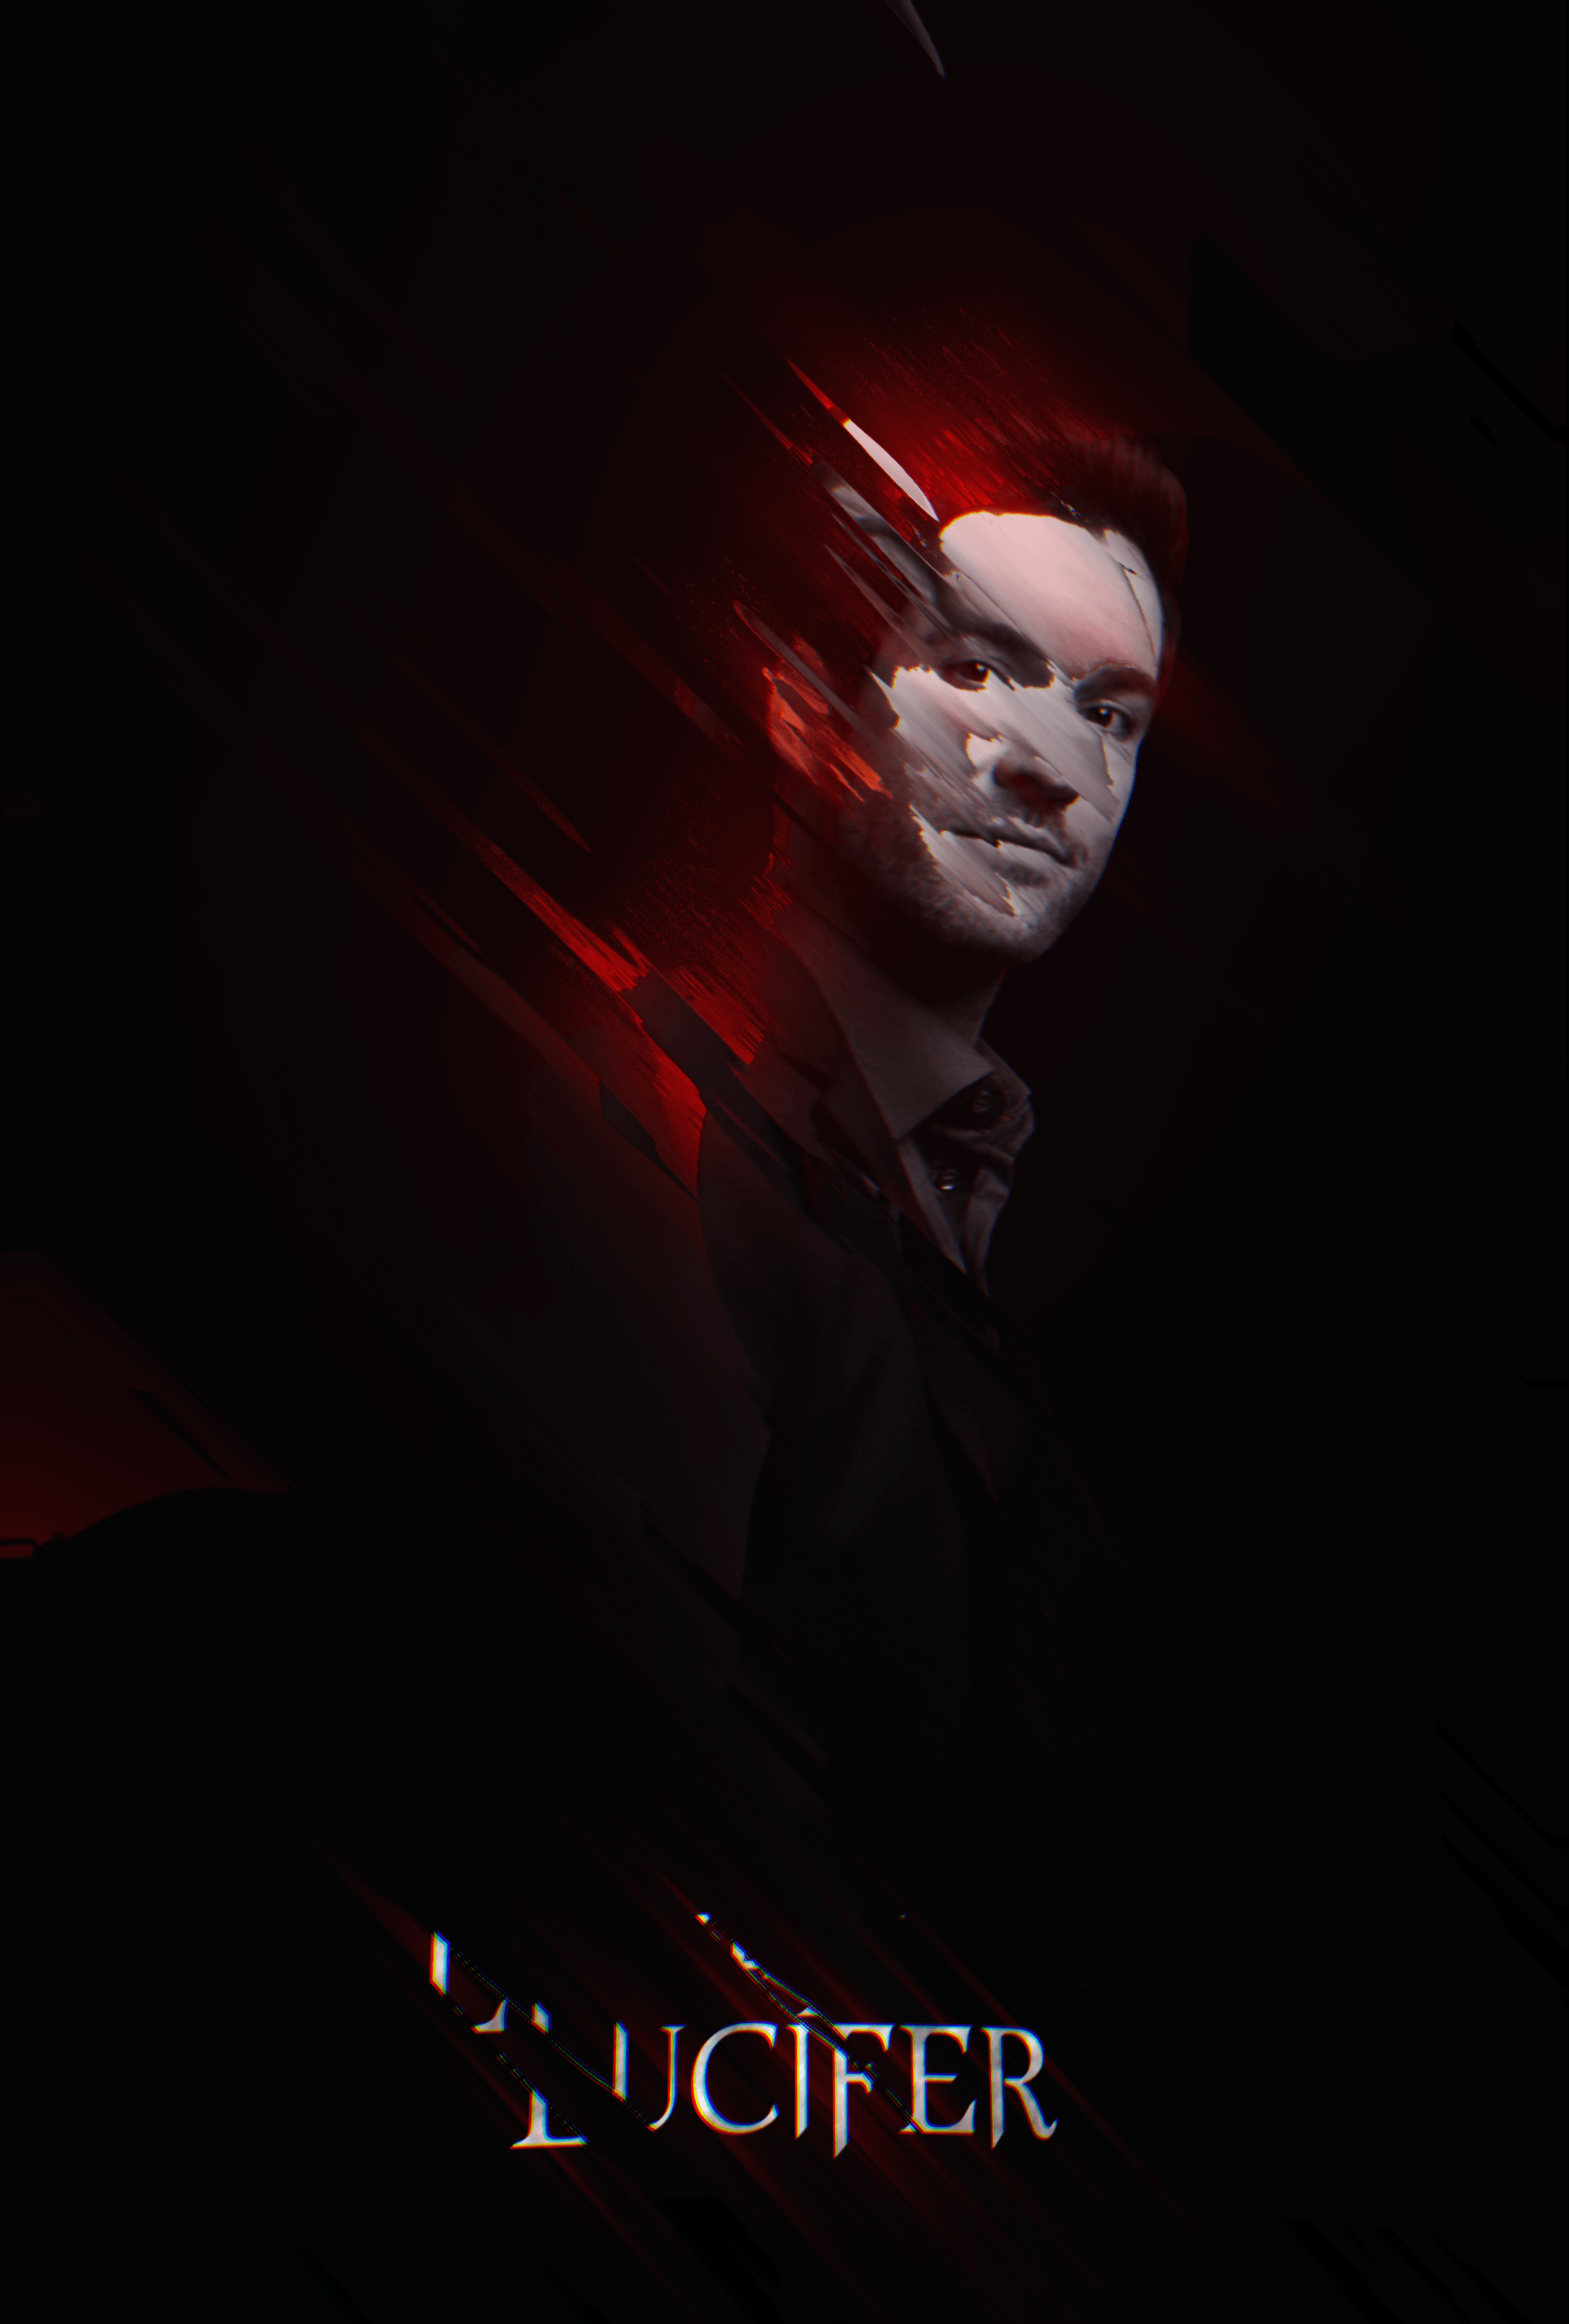 Lucifer Poster I did for fun : lucifer